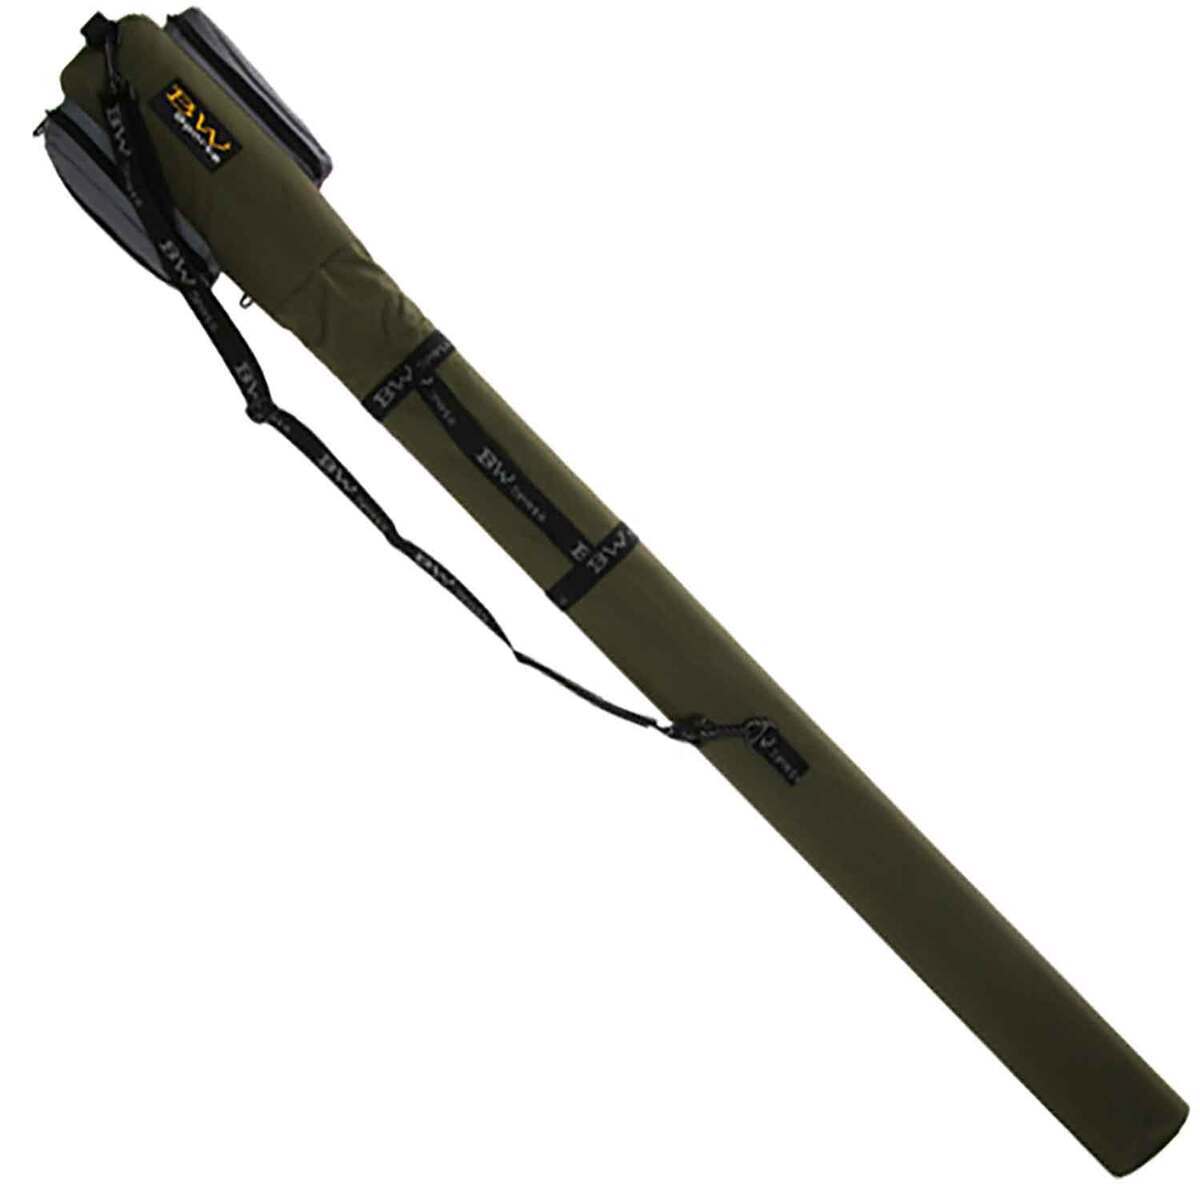  Fishing Rod Cases & Tubes - Fishing Rod Cases & Tubes / Fishing  Rods & Accessori: Sports & Outdoors